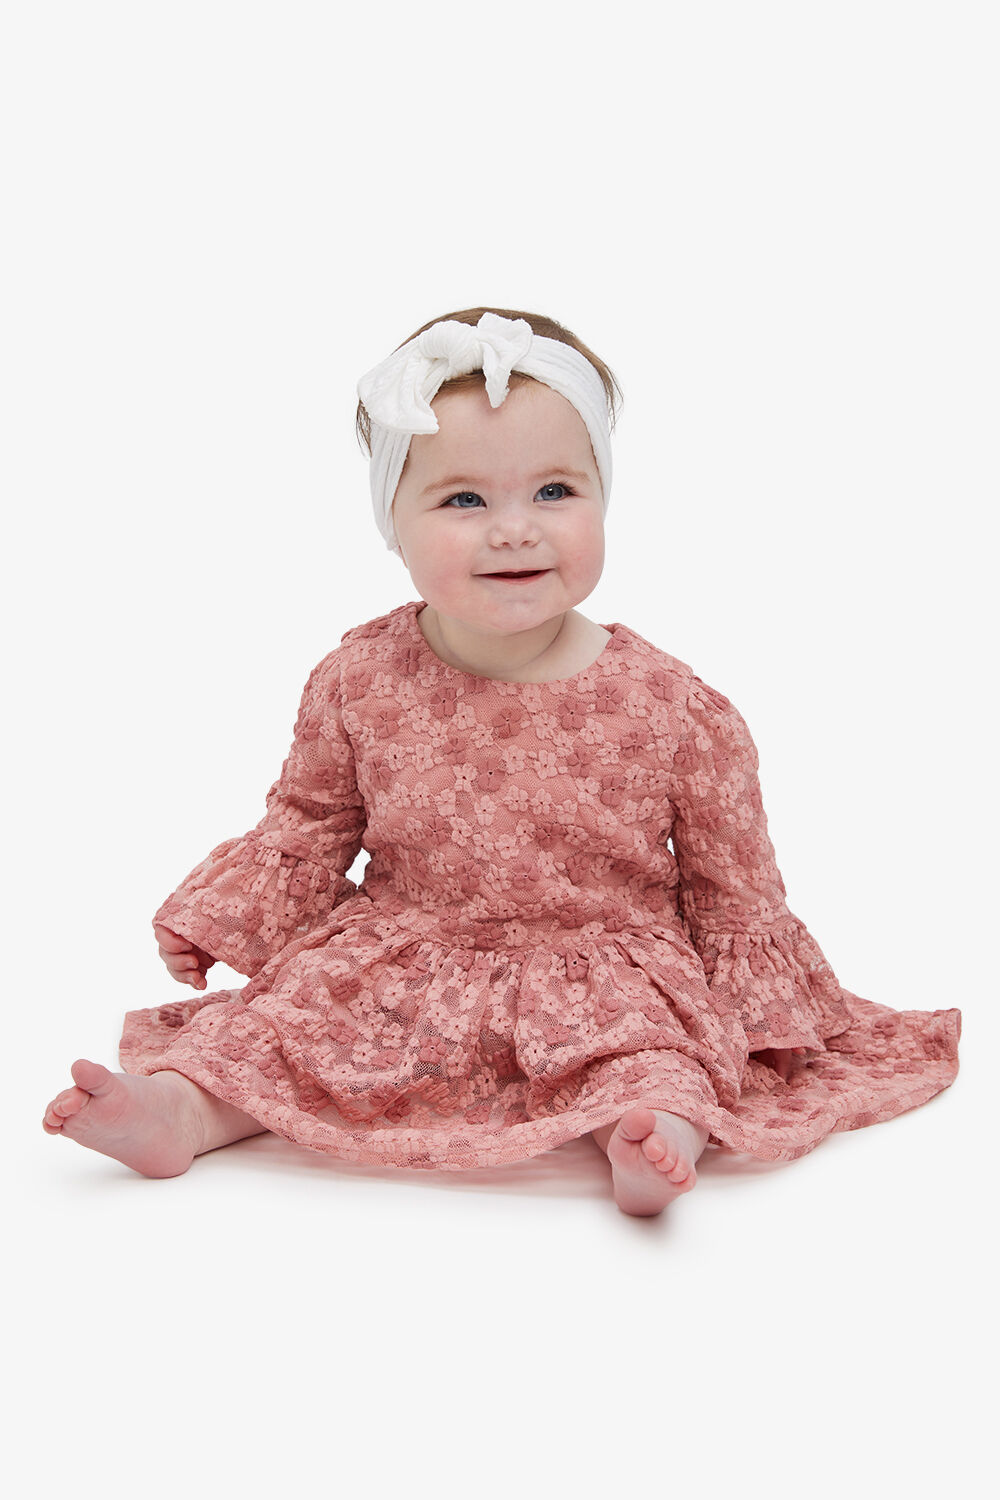 BABY GIRL ELOISE LACE DRESS in colour CASHMERE BLUE